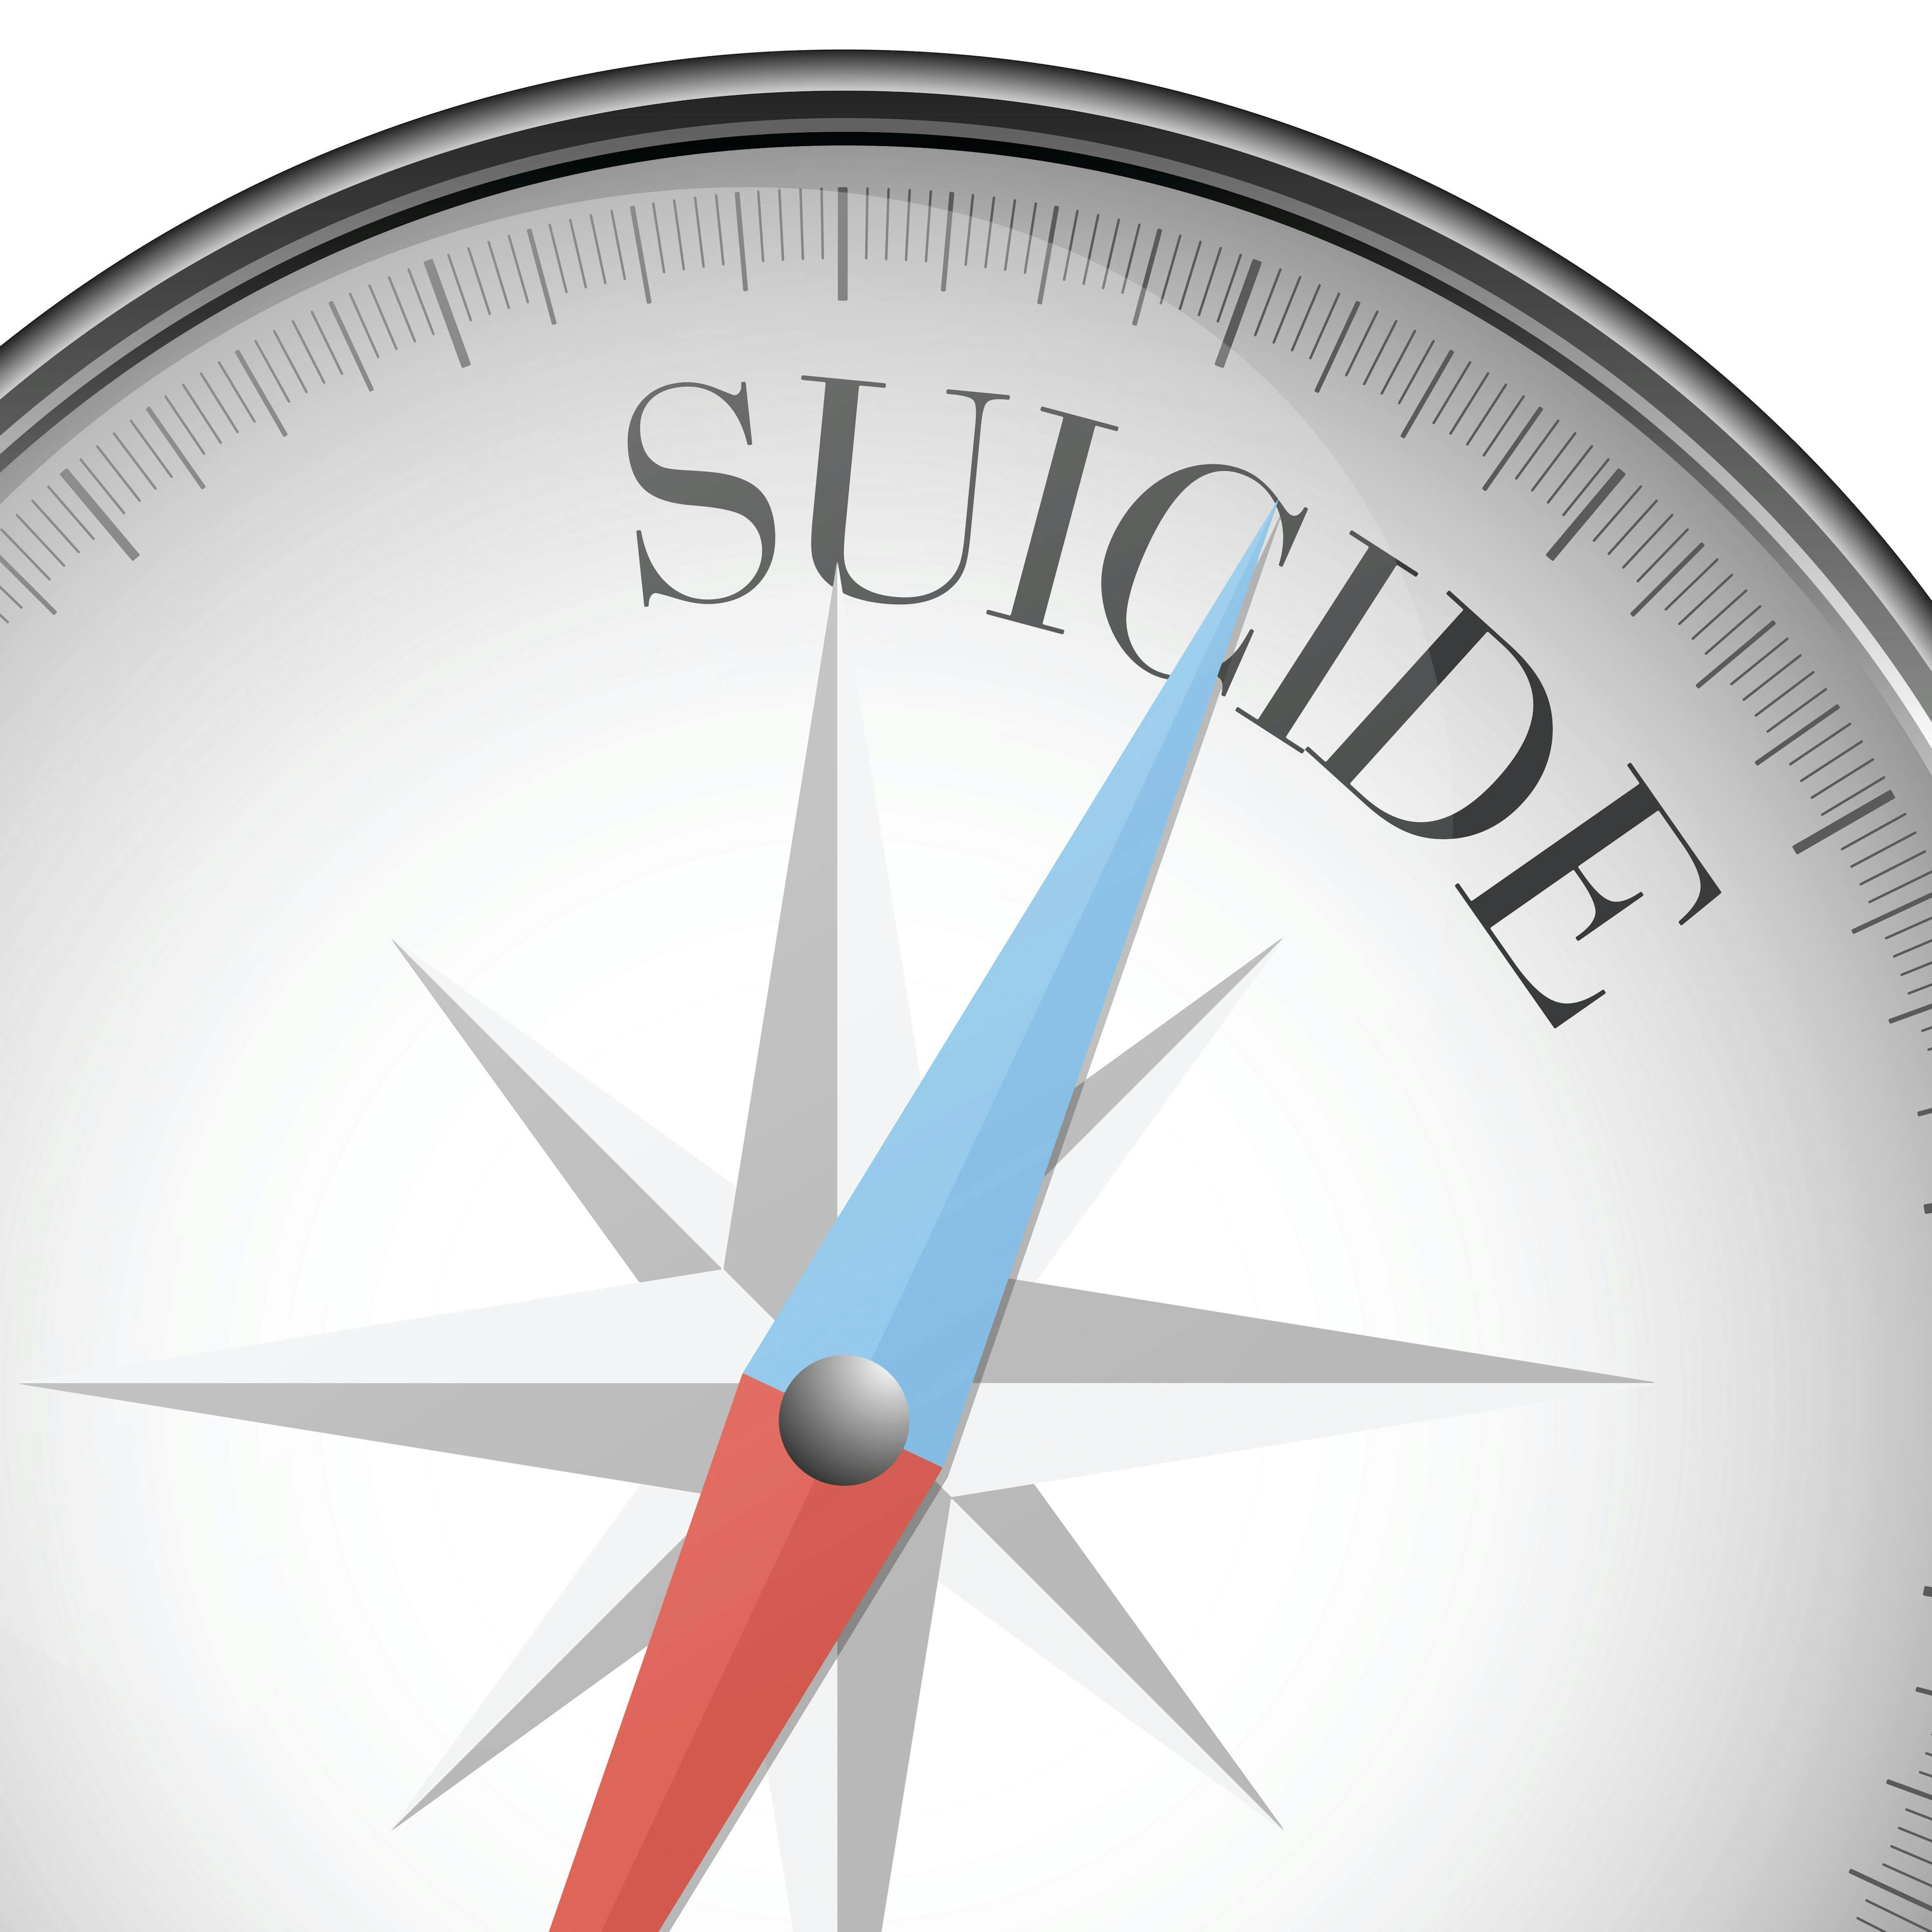 In the absence of definitive data, how can primary care providers help prevent suicide and provide compassionate care that promotes quality of life in their patients?